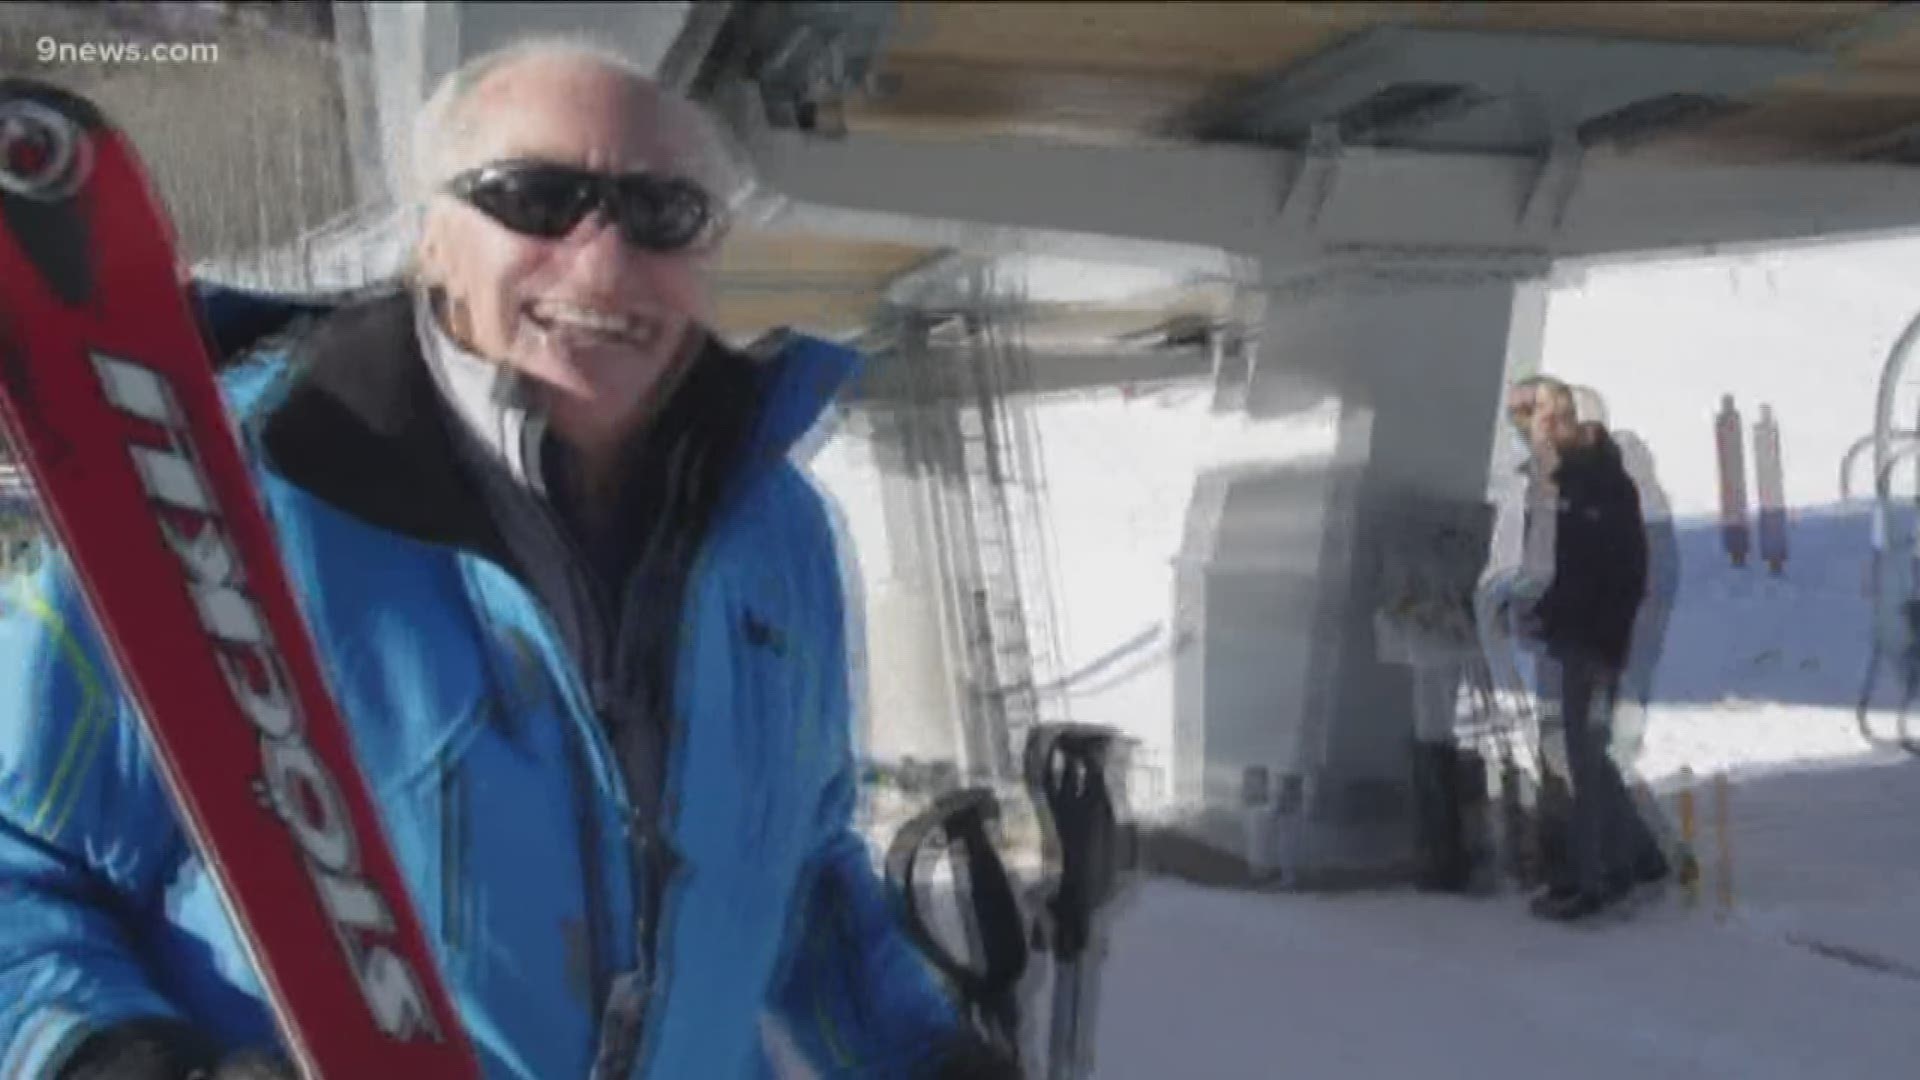 More than 70 years later, he's still enjoying success in Aspen -- and he's still a regular in his shop and on the slopes.